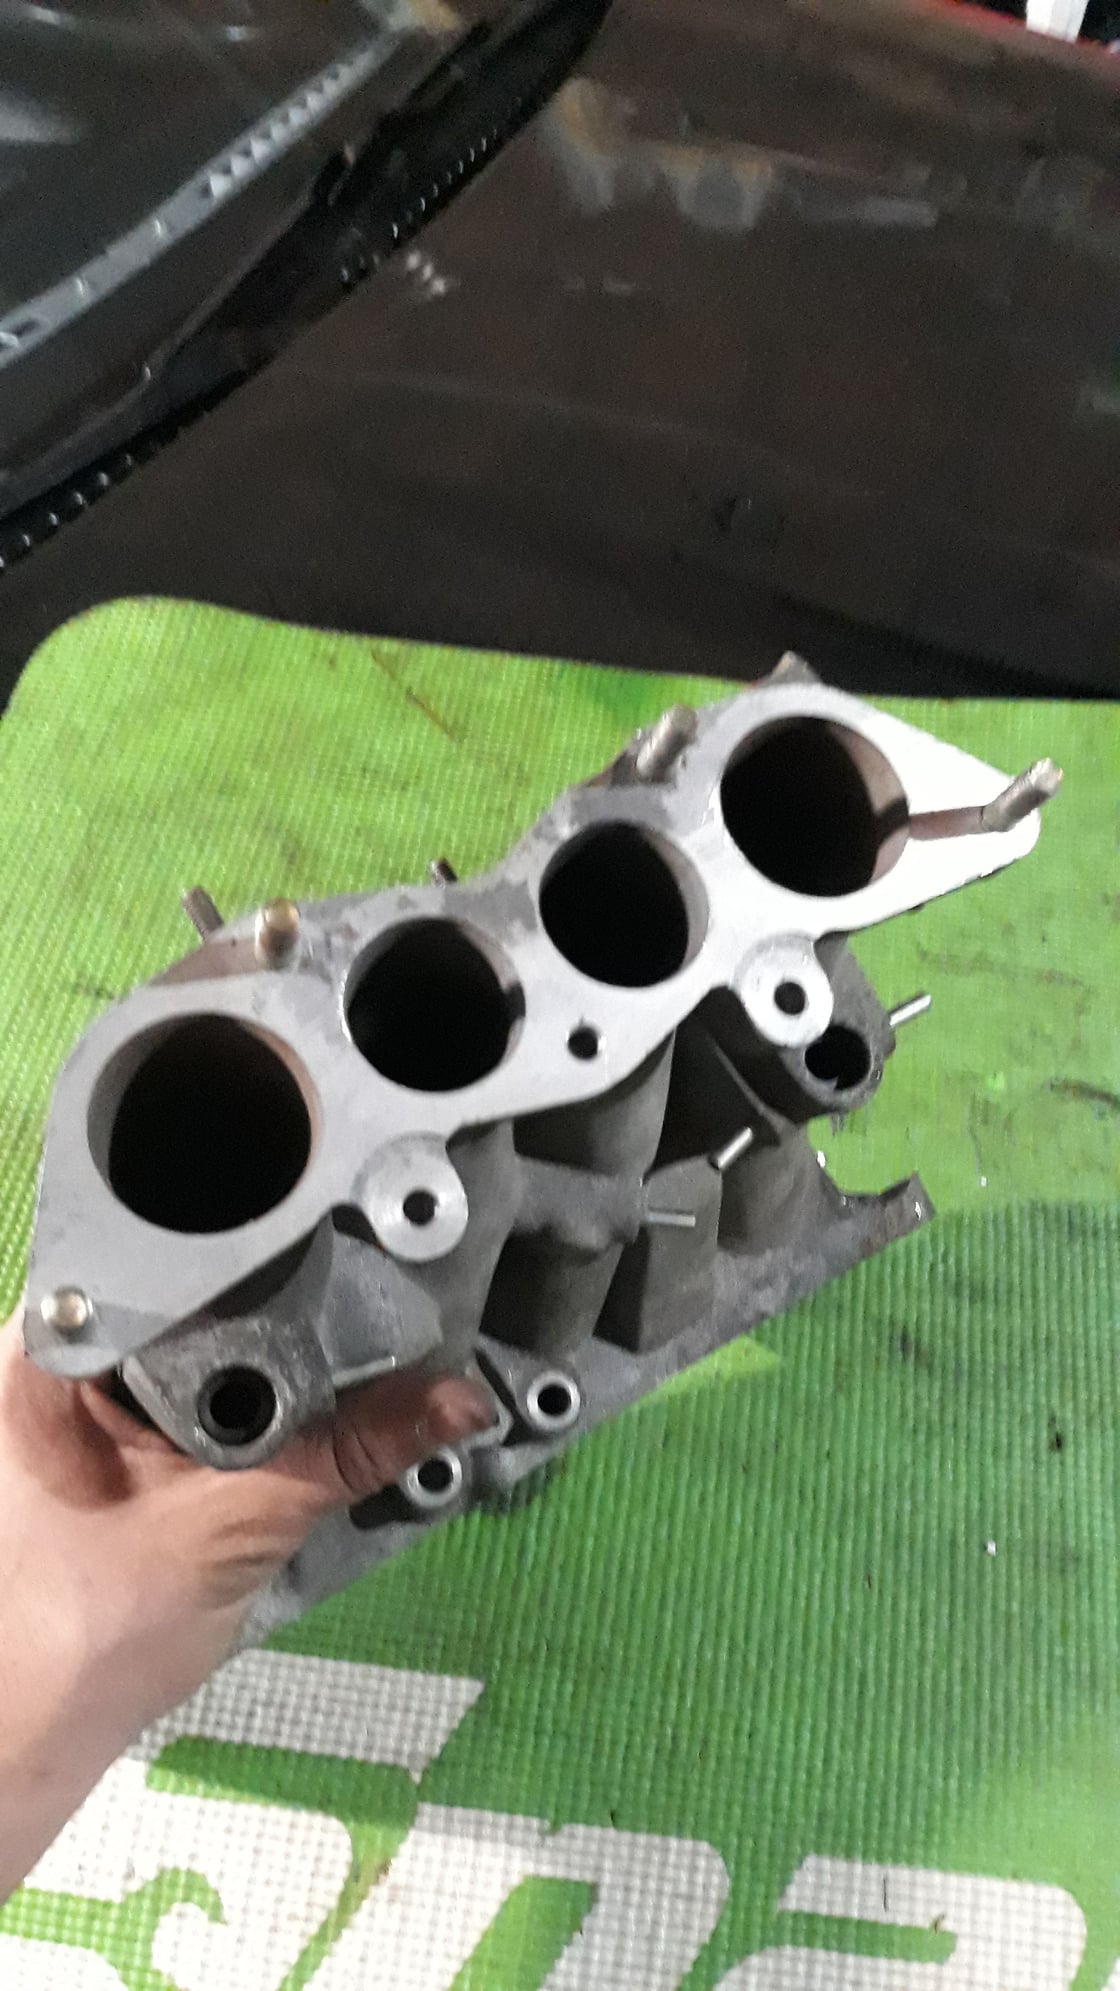 Engine - Intake/Fuel - custom t2 intake to na 6port - Used - 1986 to 1991 Mazda RX-7 - Clifton, NJ 07014, United States